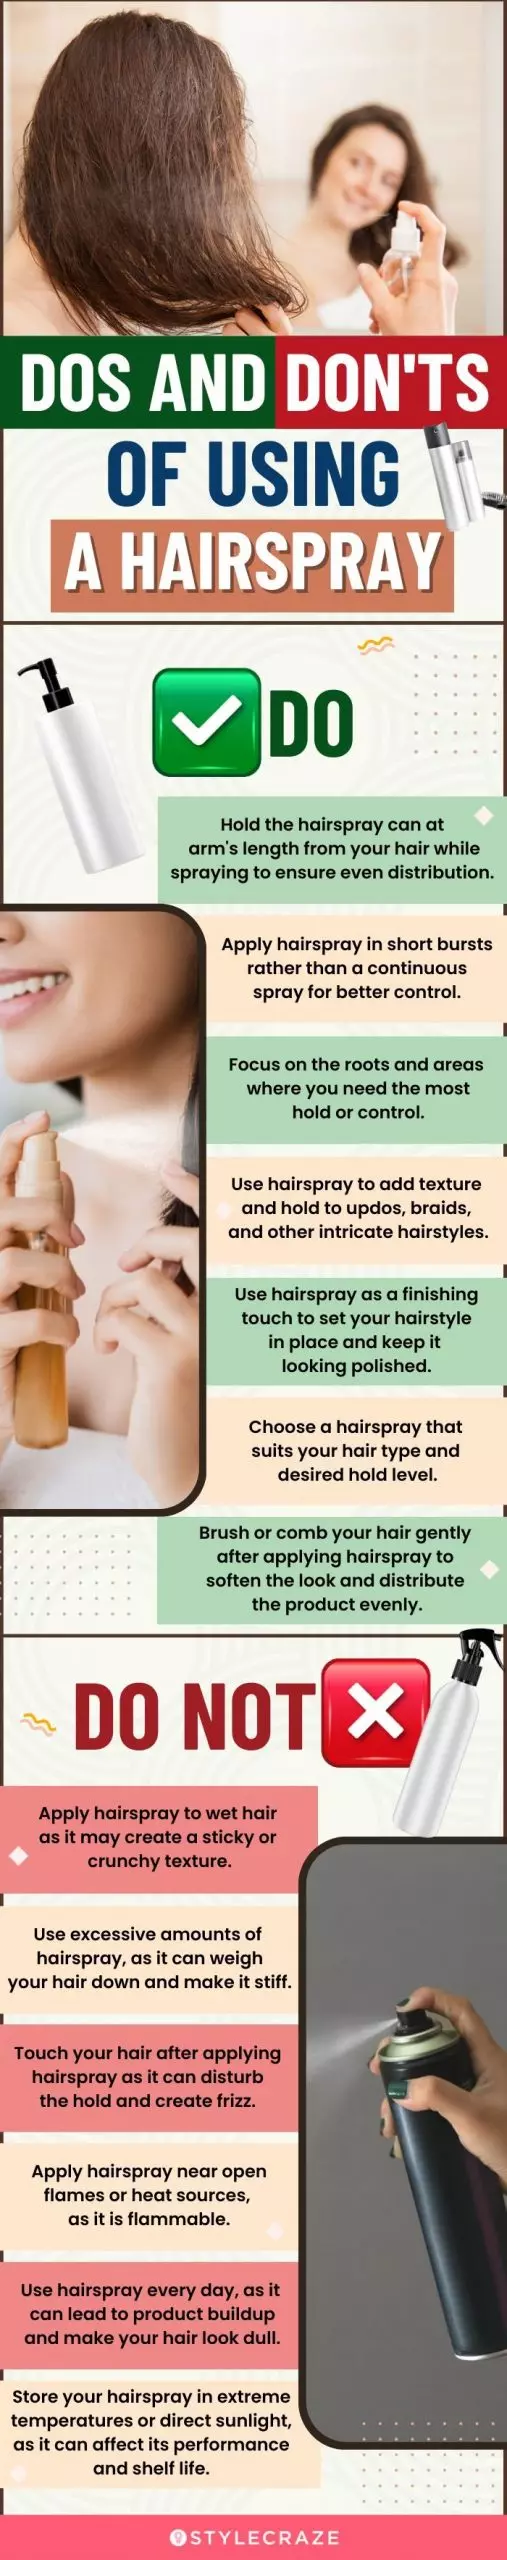 Dos and Don'ts Of Using A Hairspray (infographic)